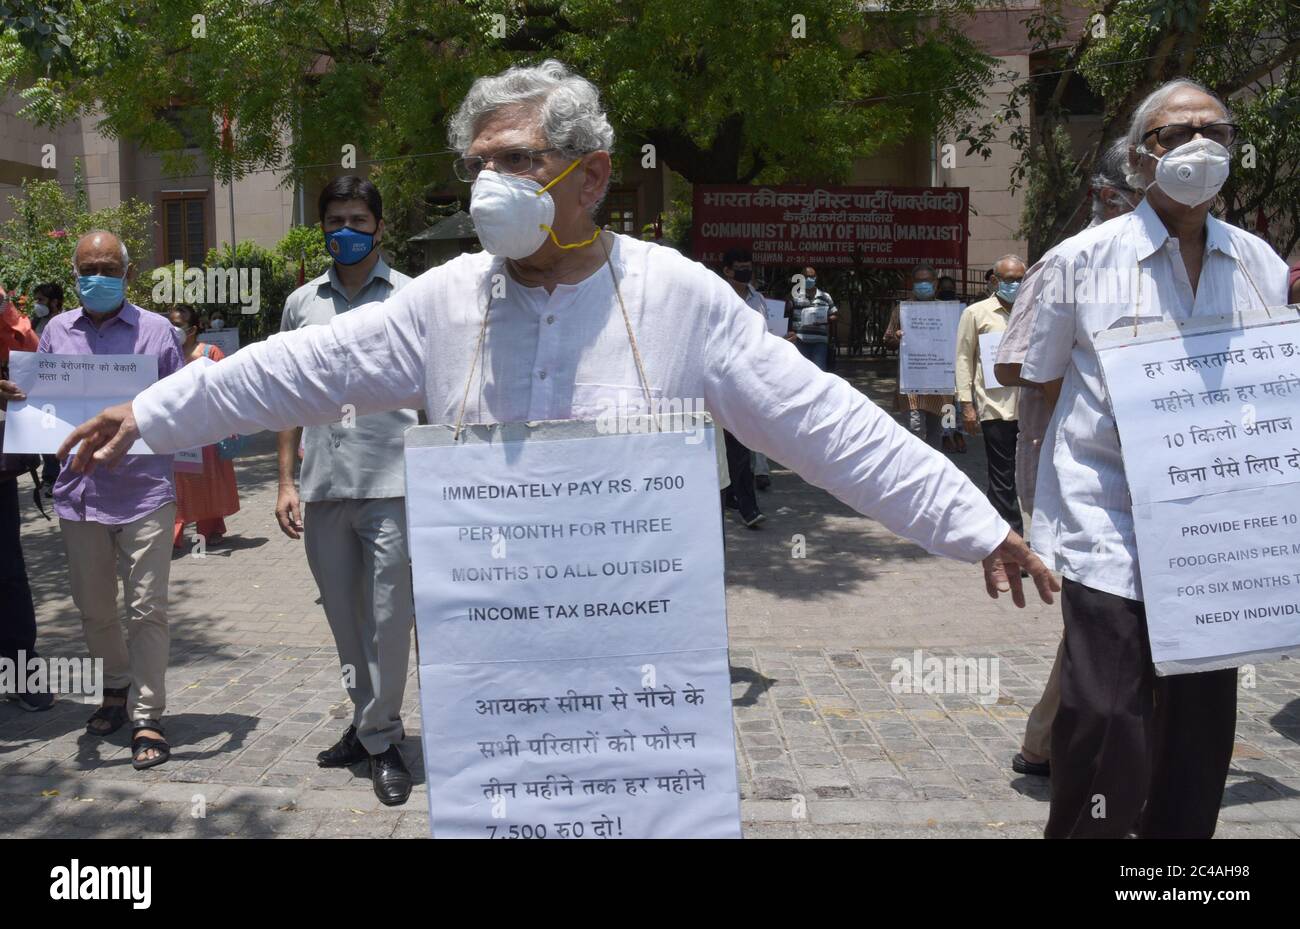 Sitaram Yetchuri, General Secretary of Communist Party of India – Marxist (CPI-M) carrying a placard with demand for employment during a protest outsi Stock Photo